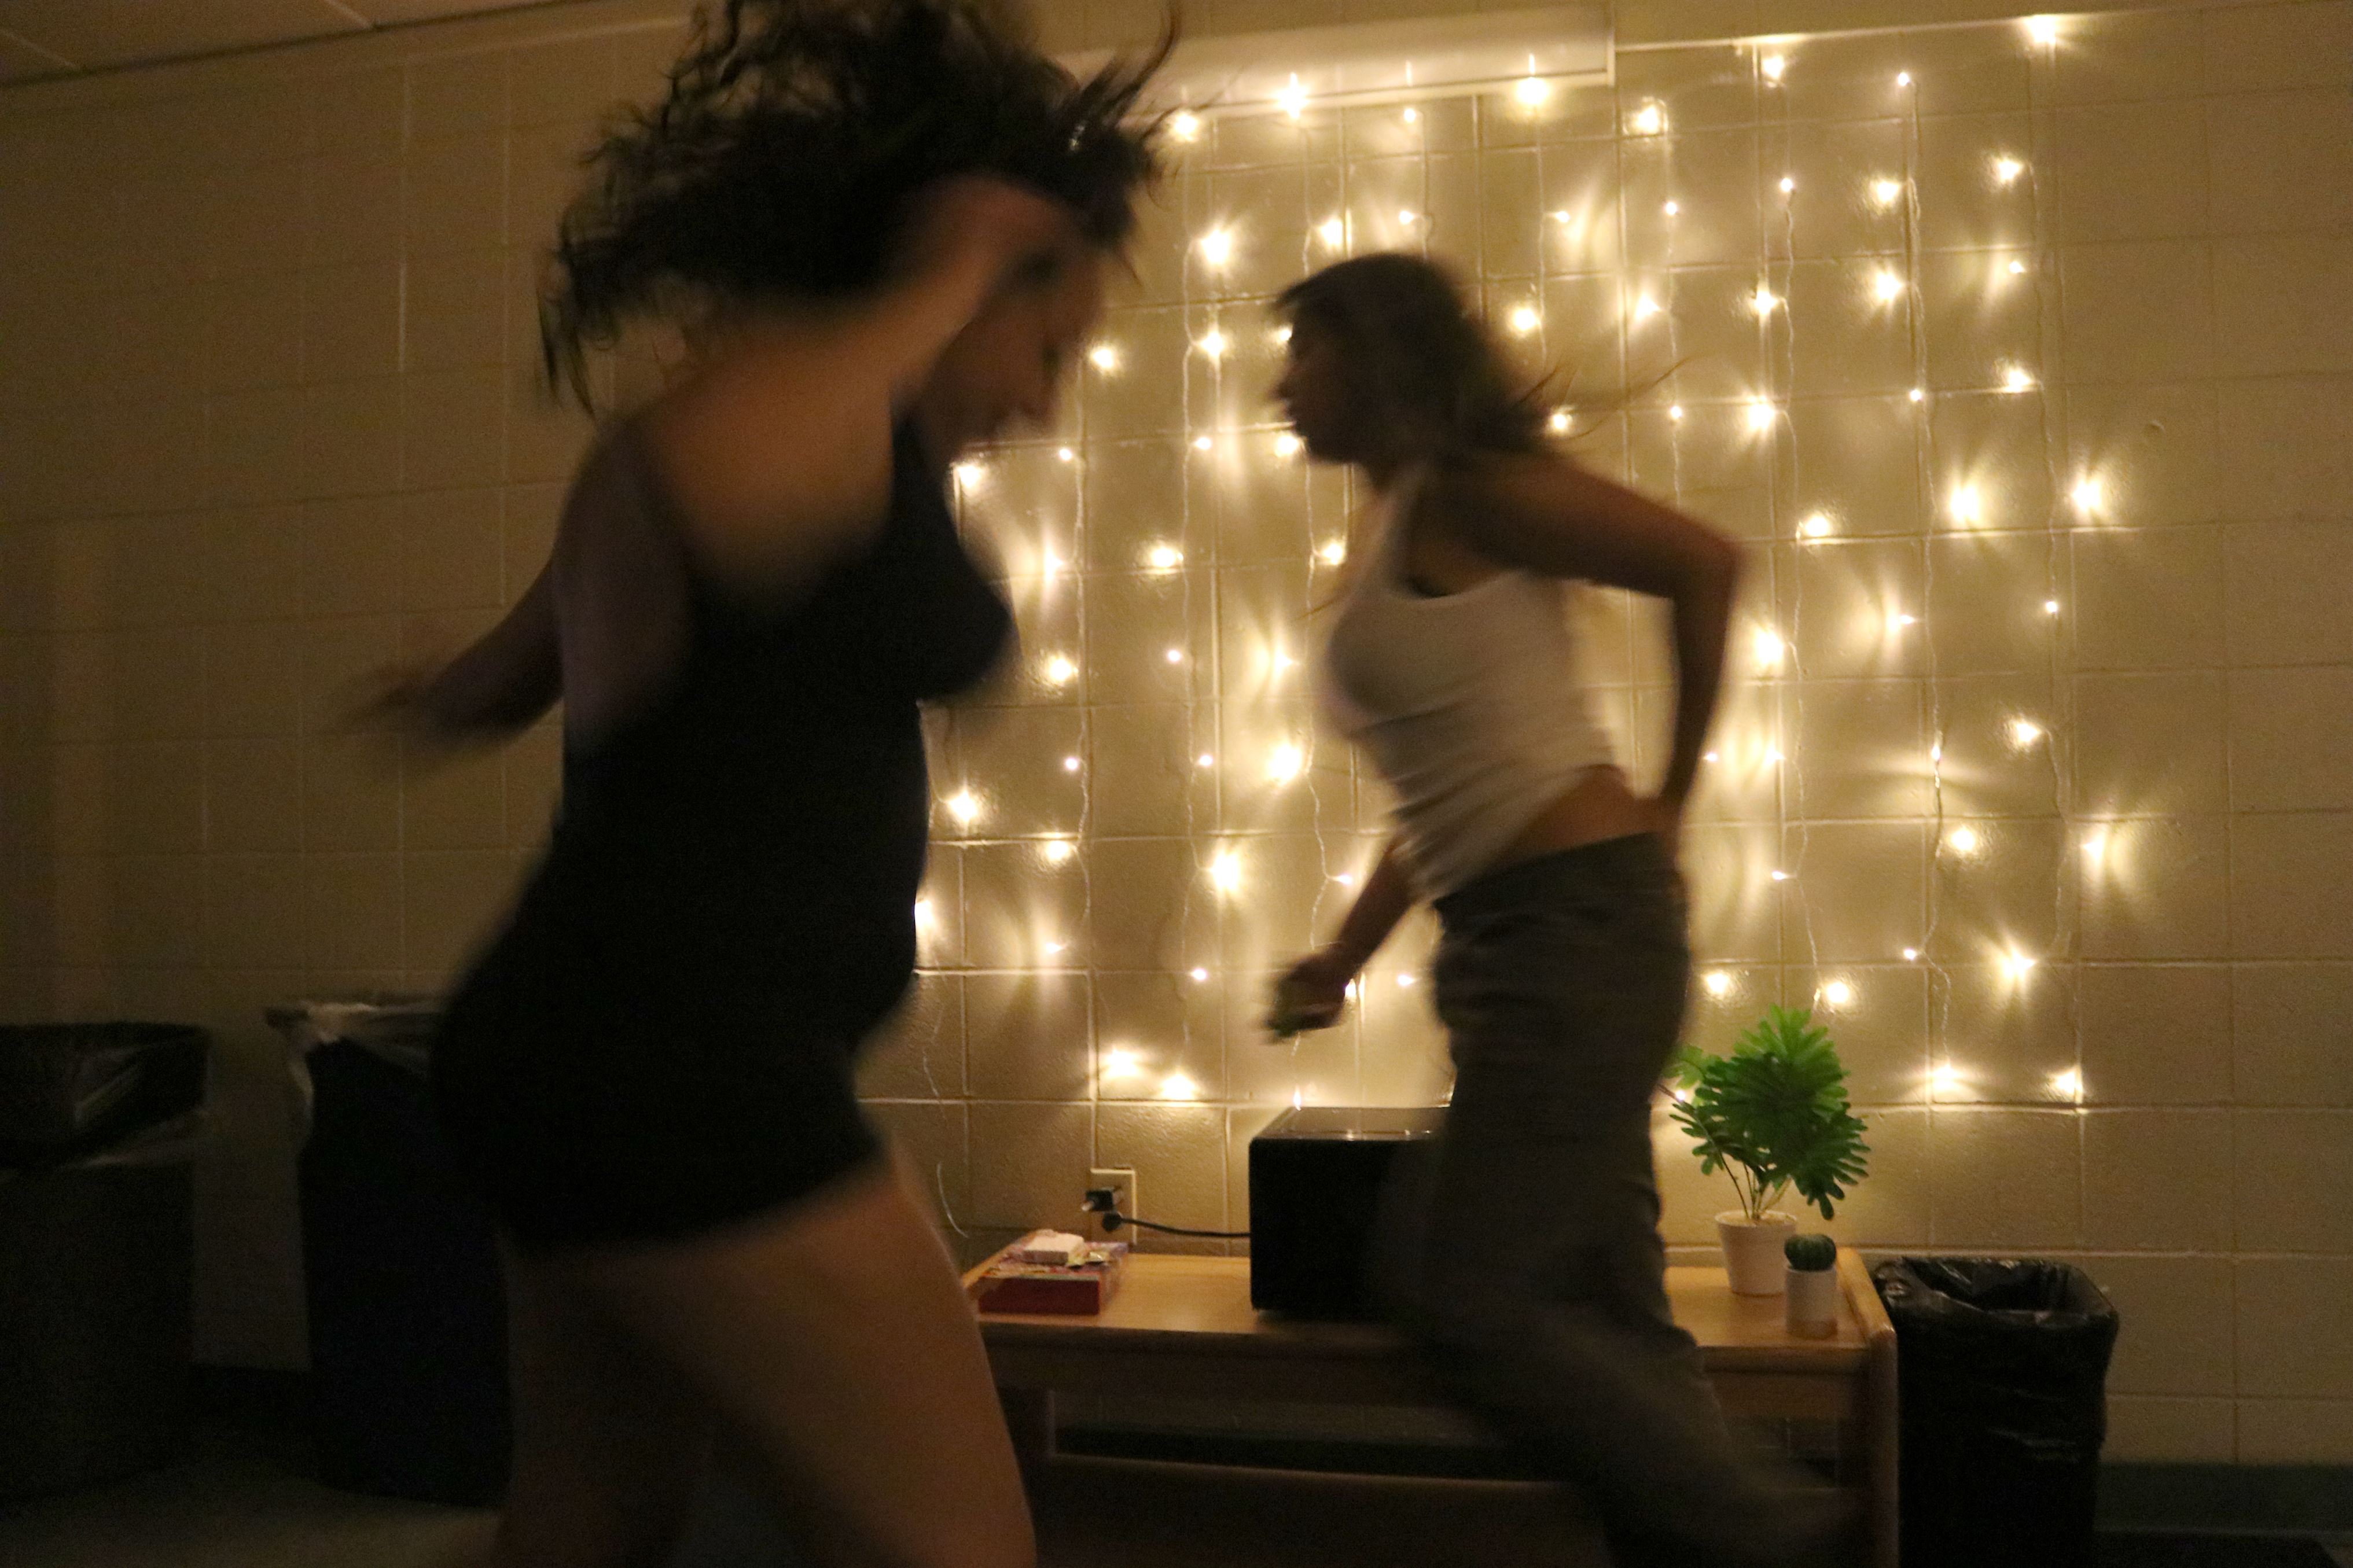 Noor Redouane and Brooklyn Spencer dancing the night away at Fairleigh Dickinson University.
Photo courtesy of Katherine K. Escobar